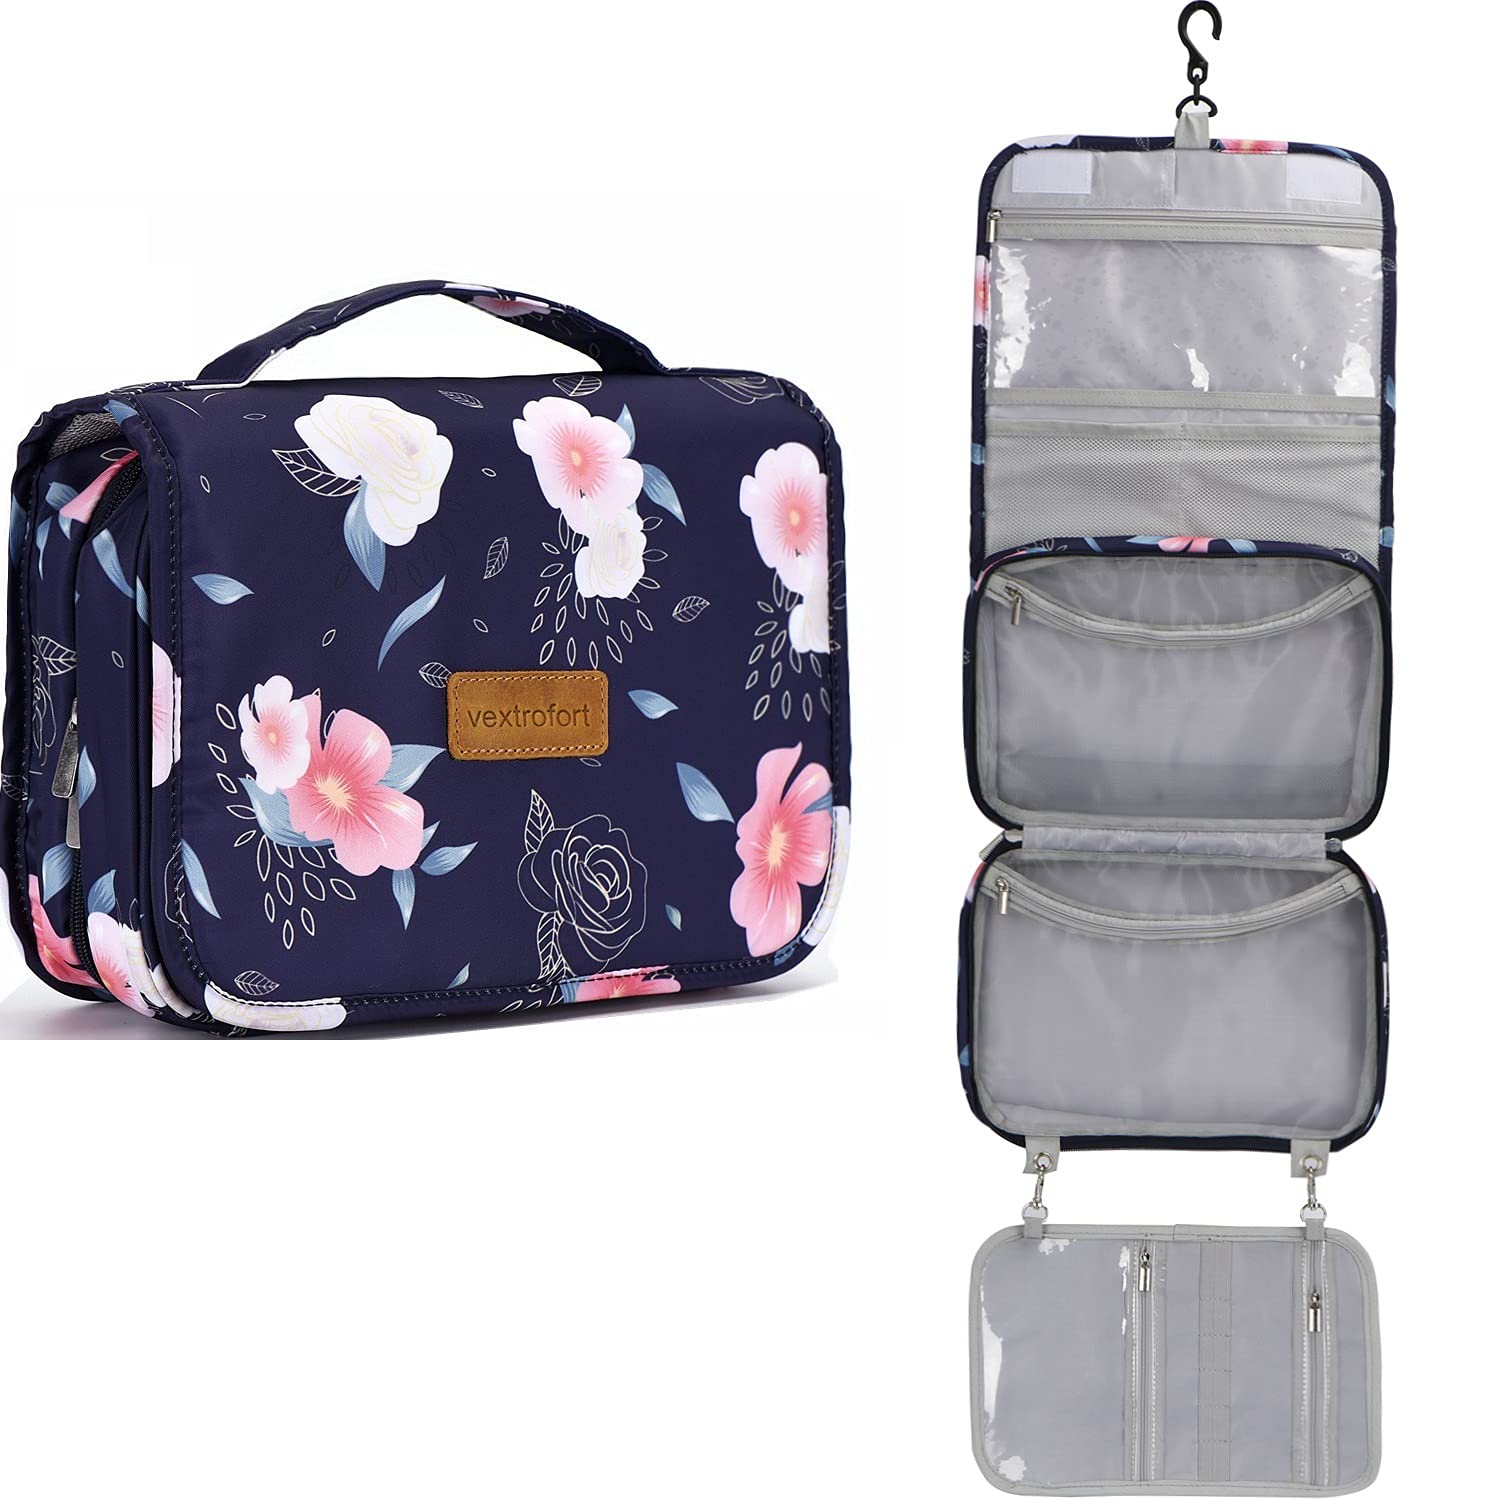 Toiletry Bag for Women, Large Hanging Travel Makeup Bag Water-resistant for  Toiletries/Cosmetics/Brushes (Blue Flower)